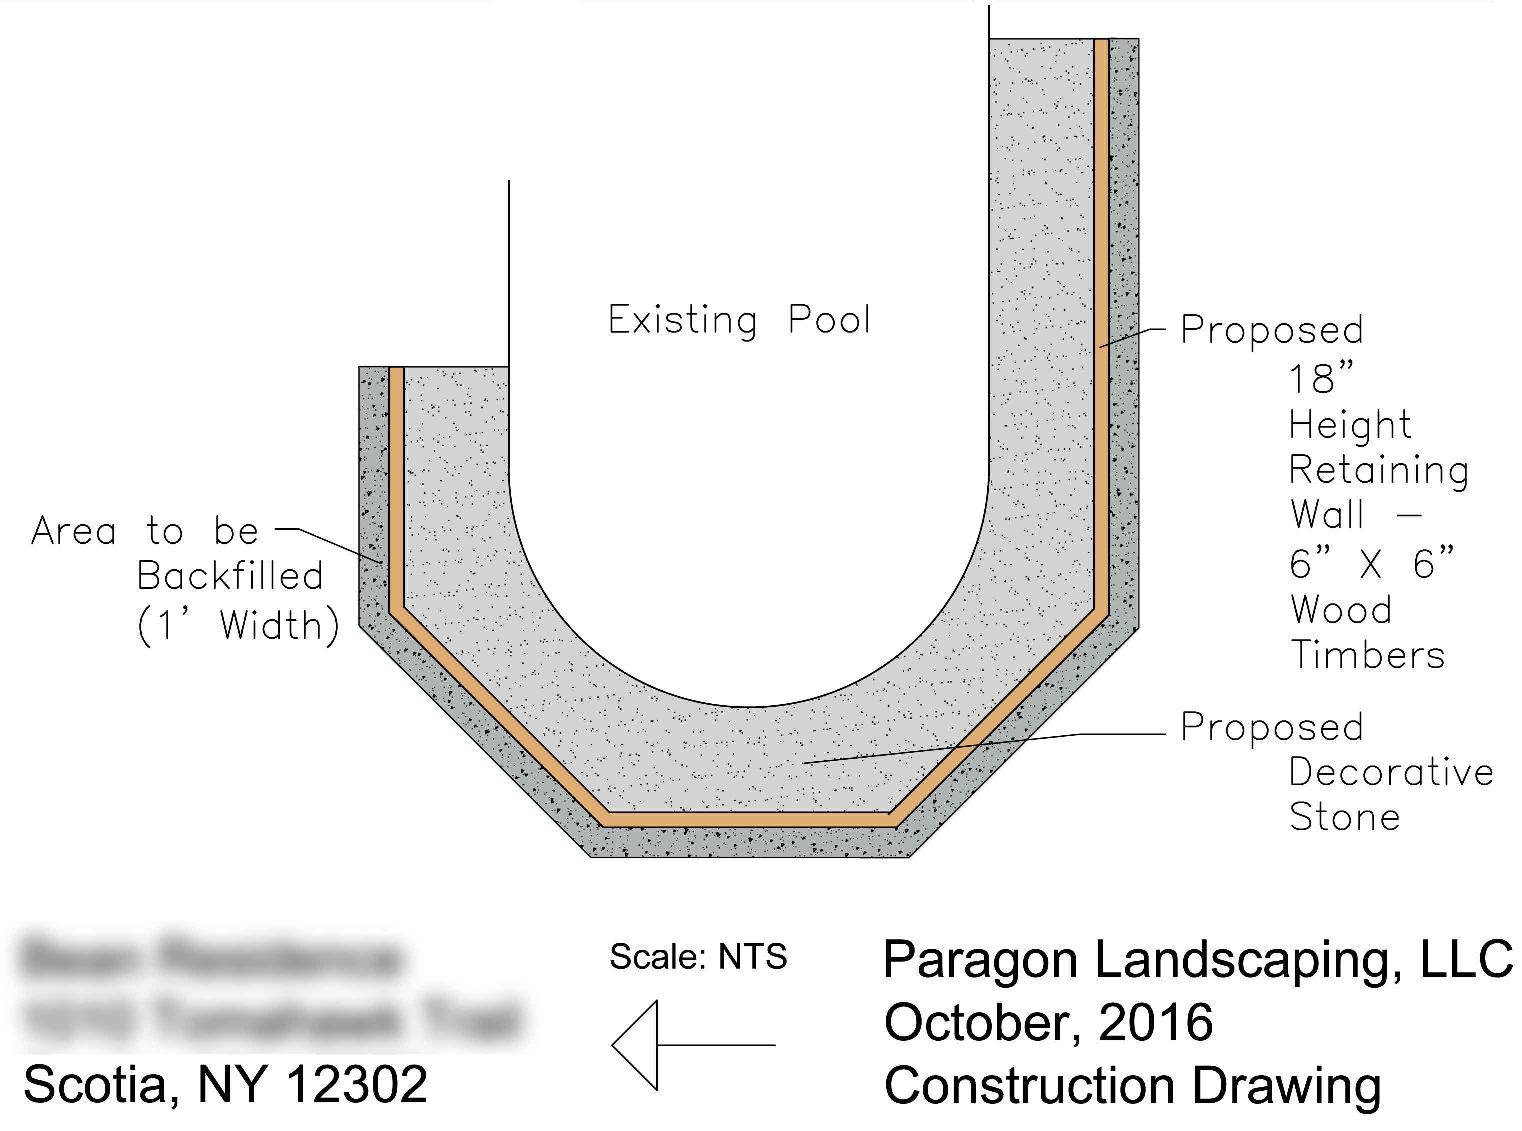 Thumbnail of Construction drawing, retaining wall and decorative stone